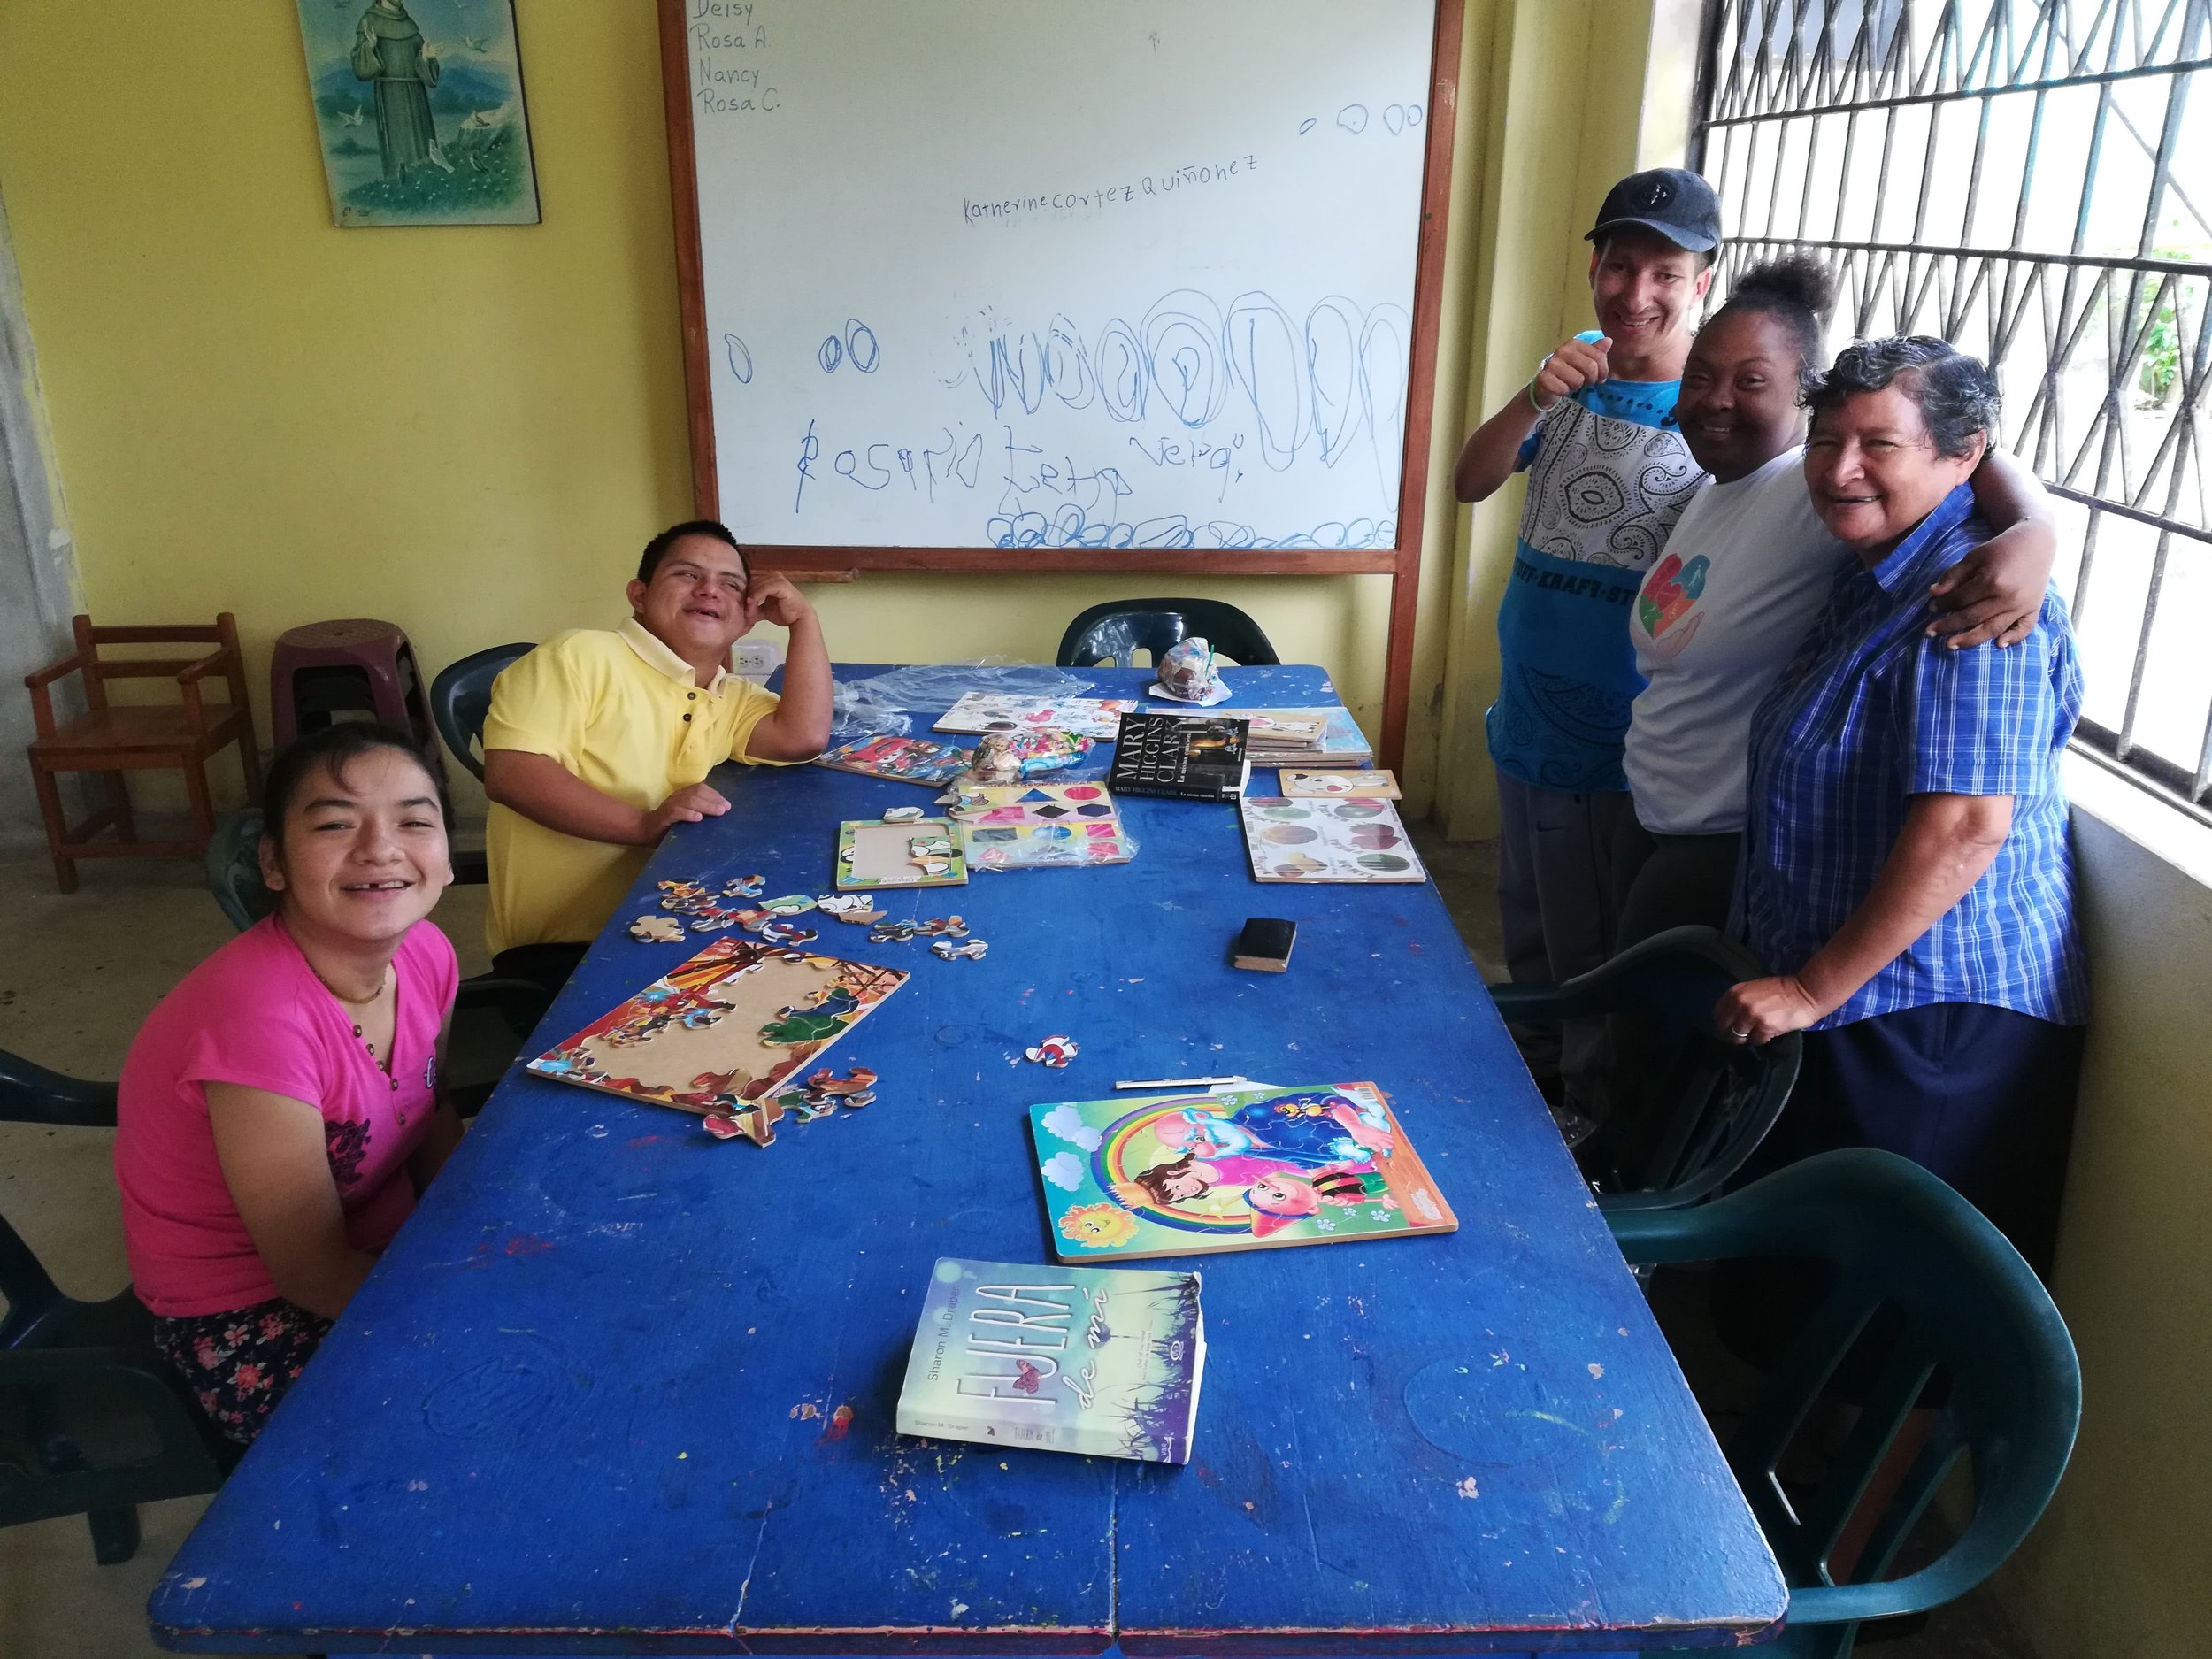  Some time with several old friends and Sr Yenny, in a program for people with disabilities. Volunteering for Amigos del Arca in 2013, we became friends, and it’s good to see them again. 